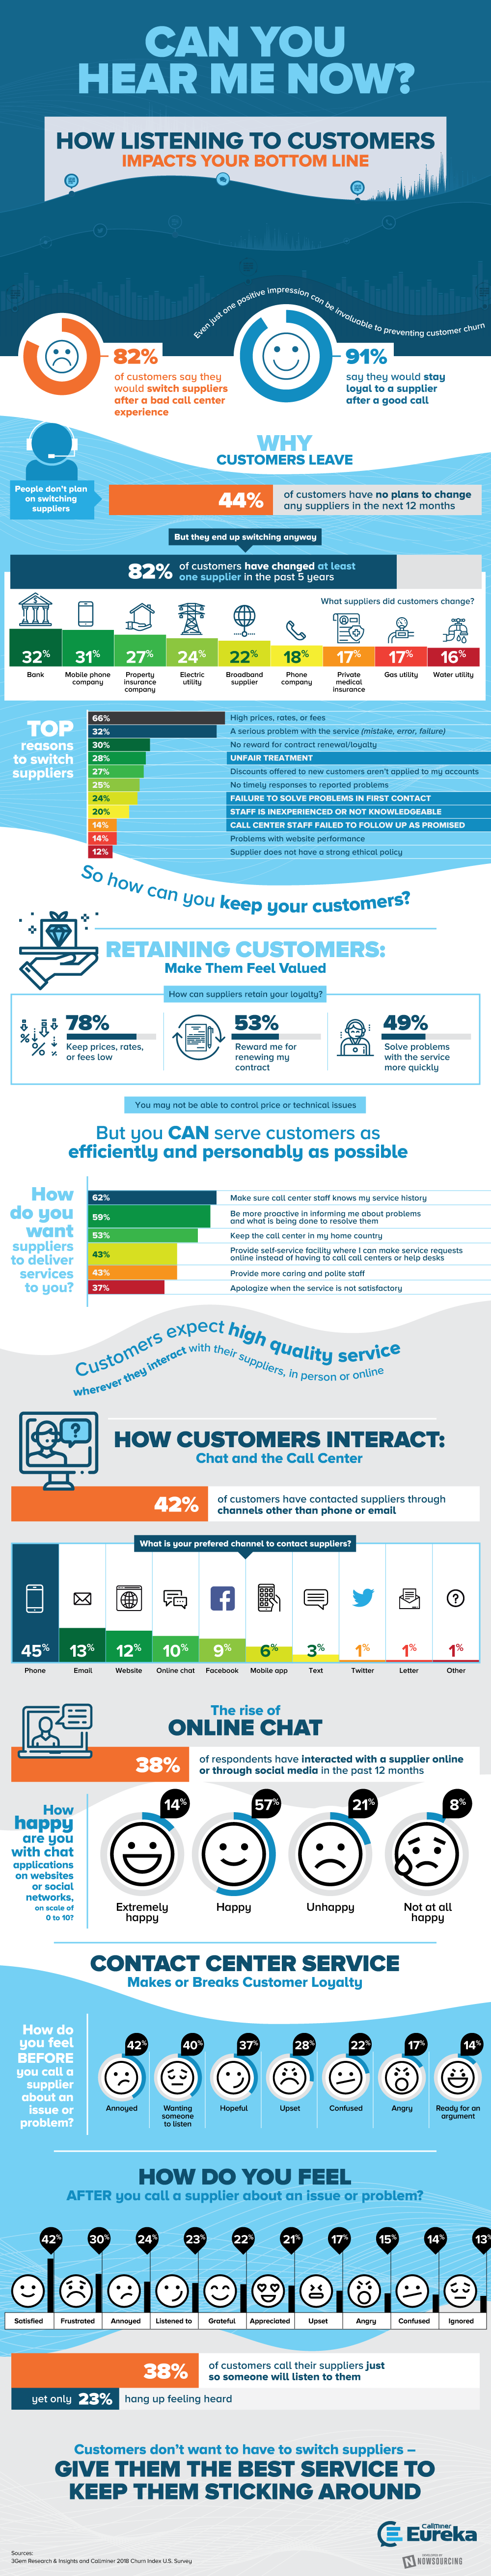 Preventing Customer Churn Through One Simple Act [Infographic]